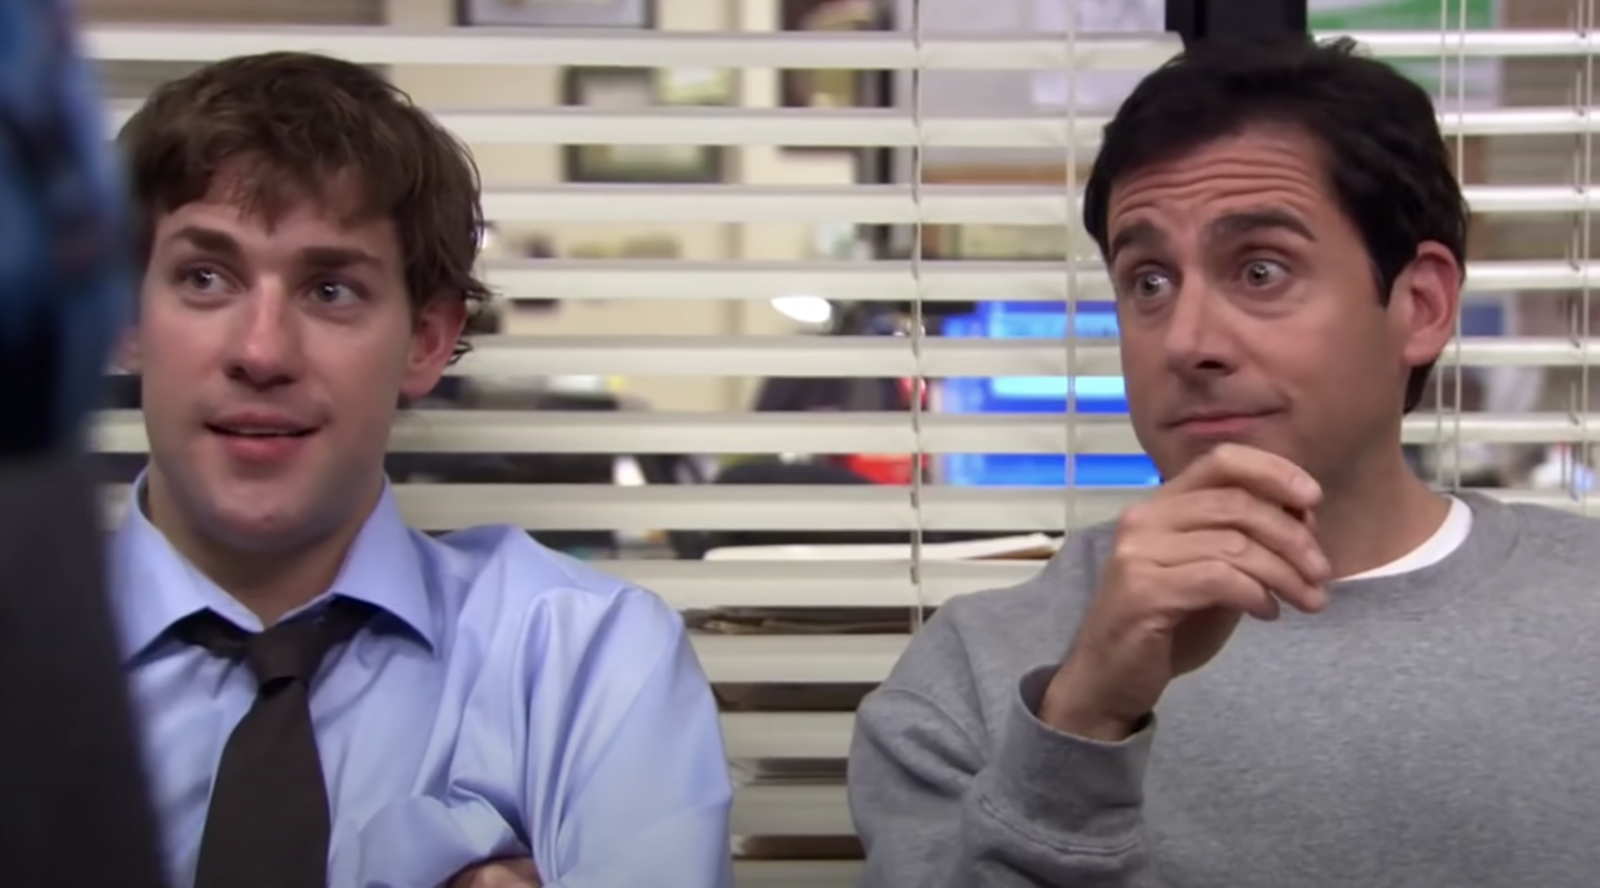 two men, one in a button down and tie, the other in a crewneck sweatshirt, sit in an office conference room, smiliing